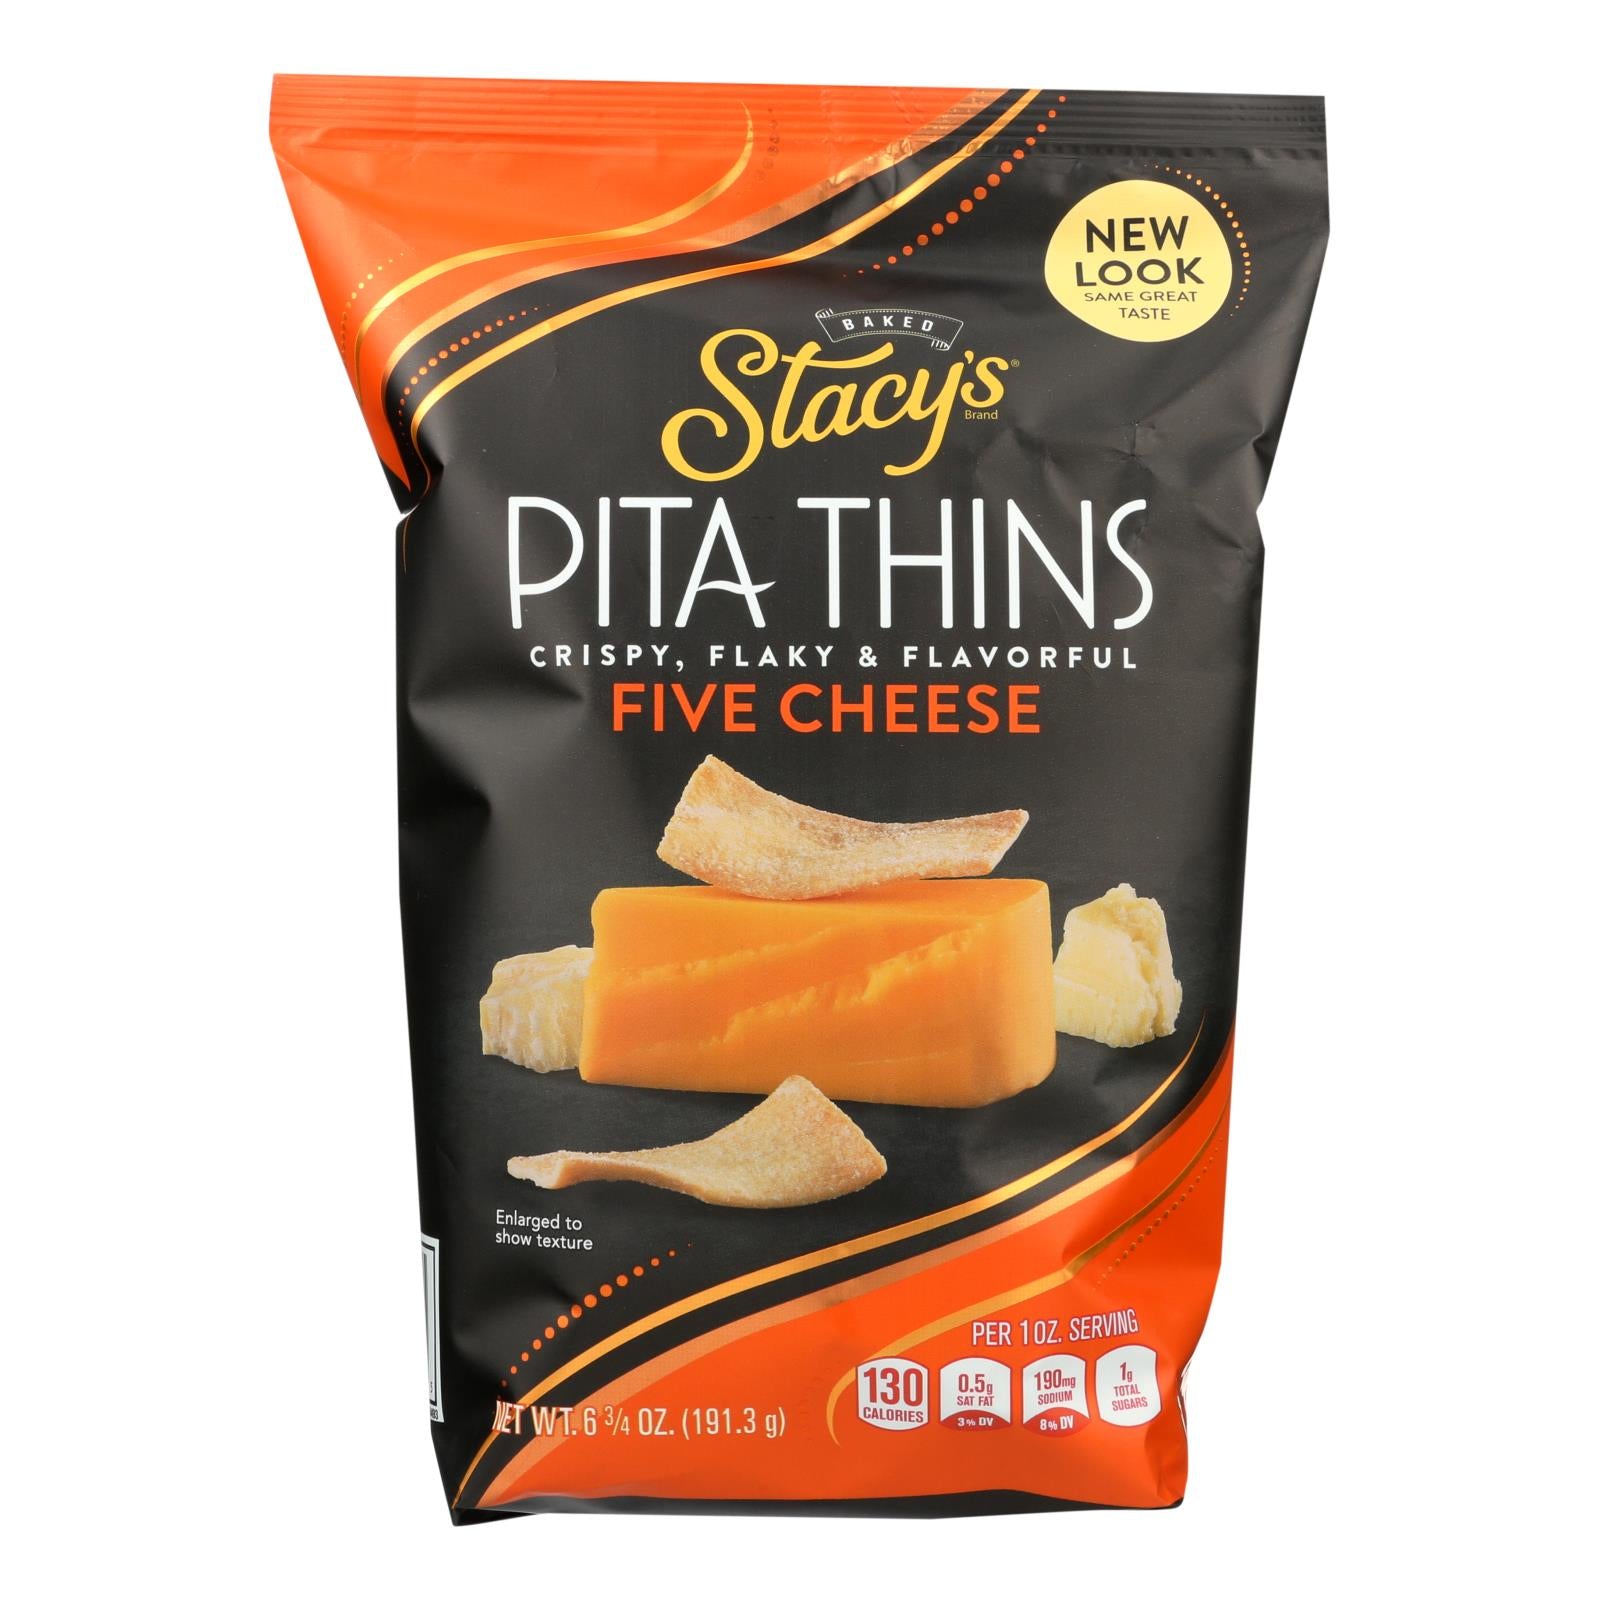 Stacy's Pita Chips 5 Cheese Pita Crisps - Cheese - Case Of 8 - 6.75 Oz. | OnlyNaturals.us